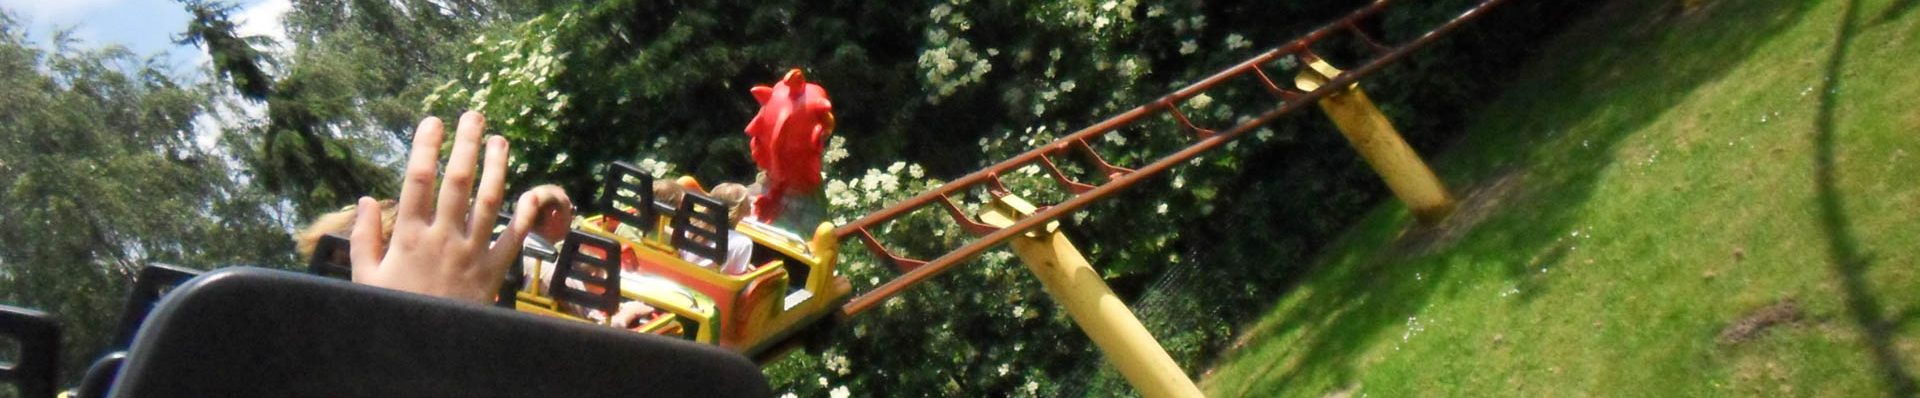 Rides and animals in Thüle